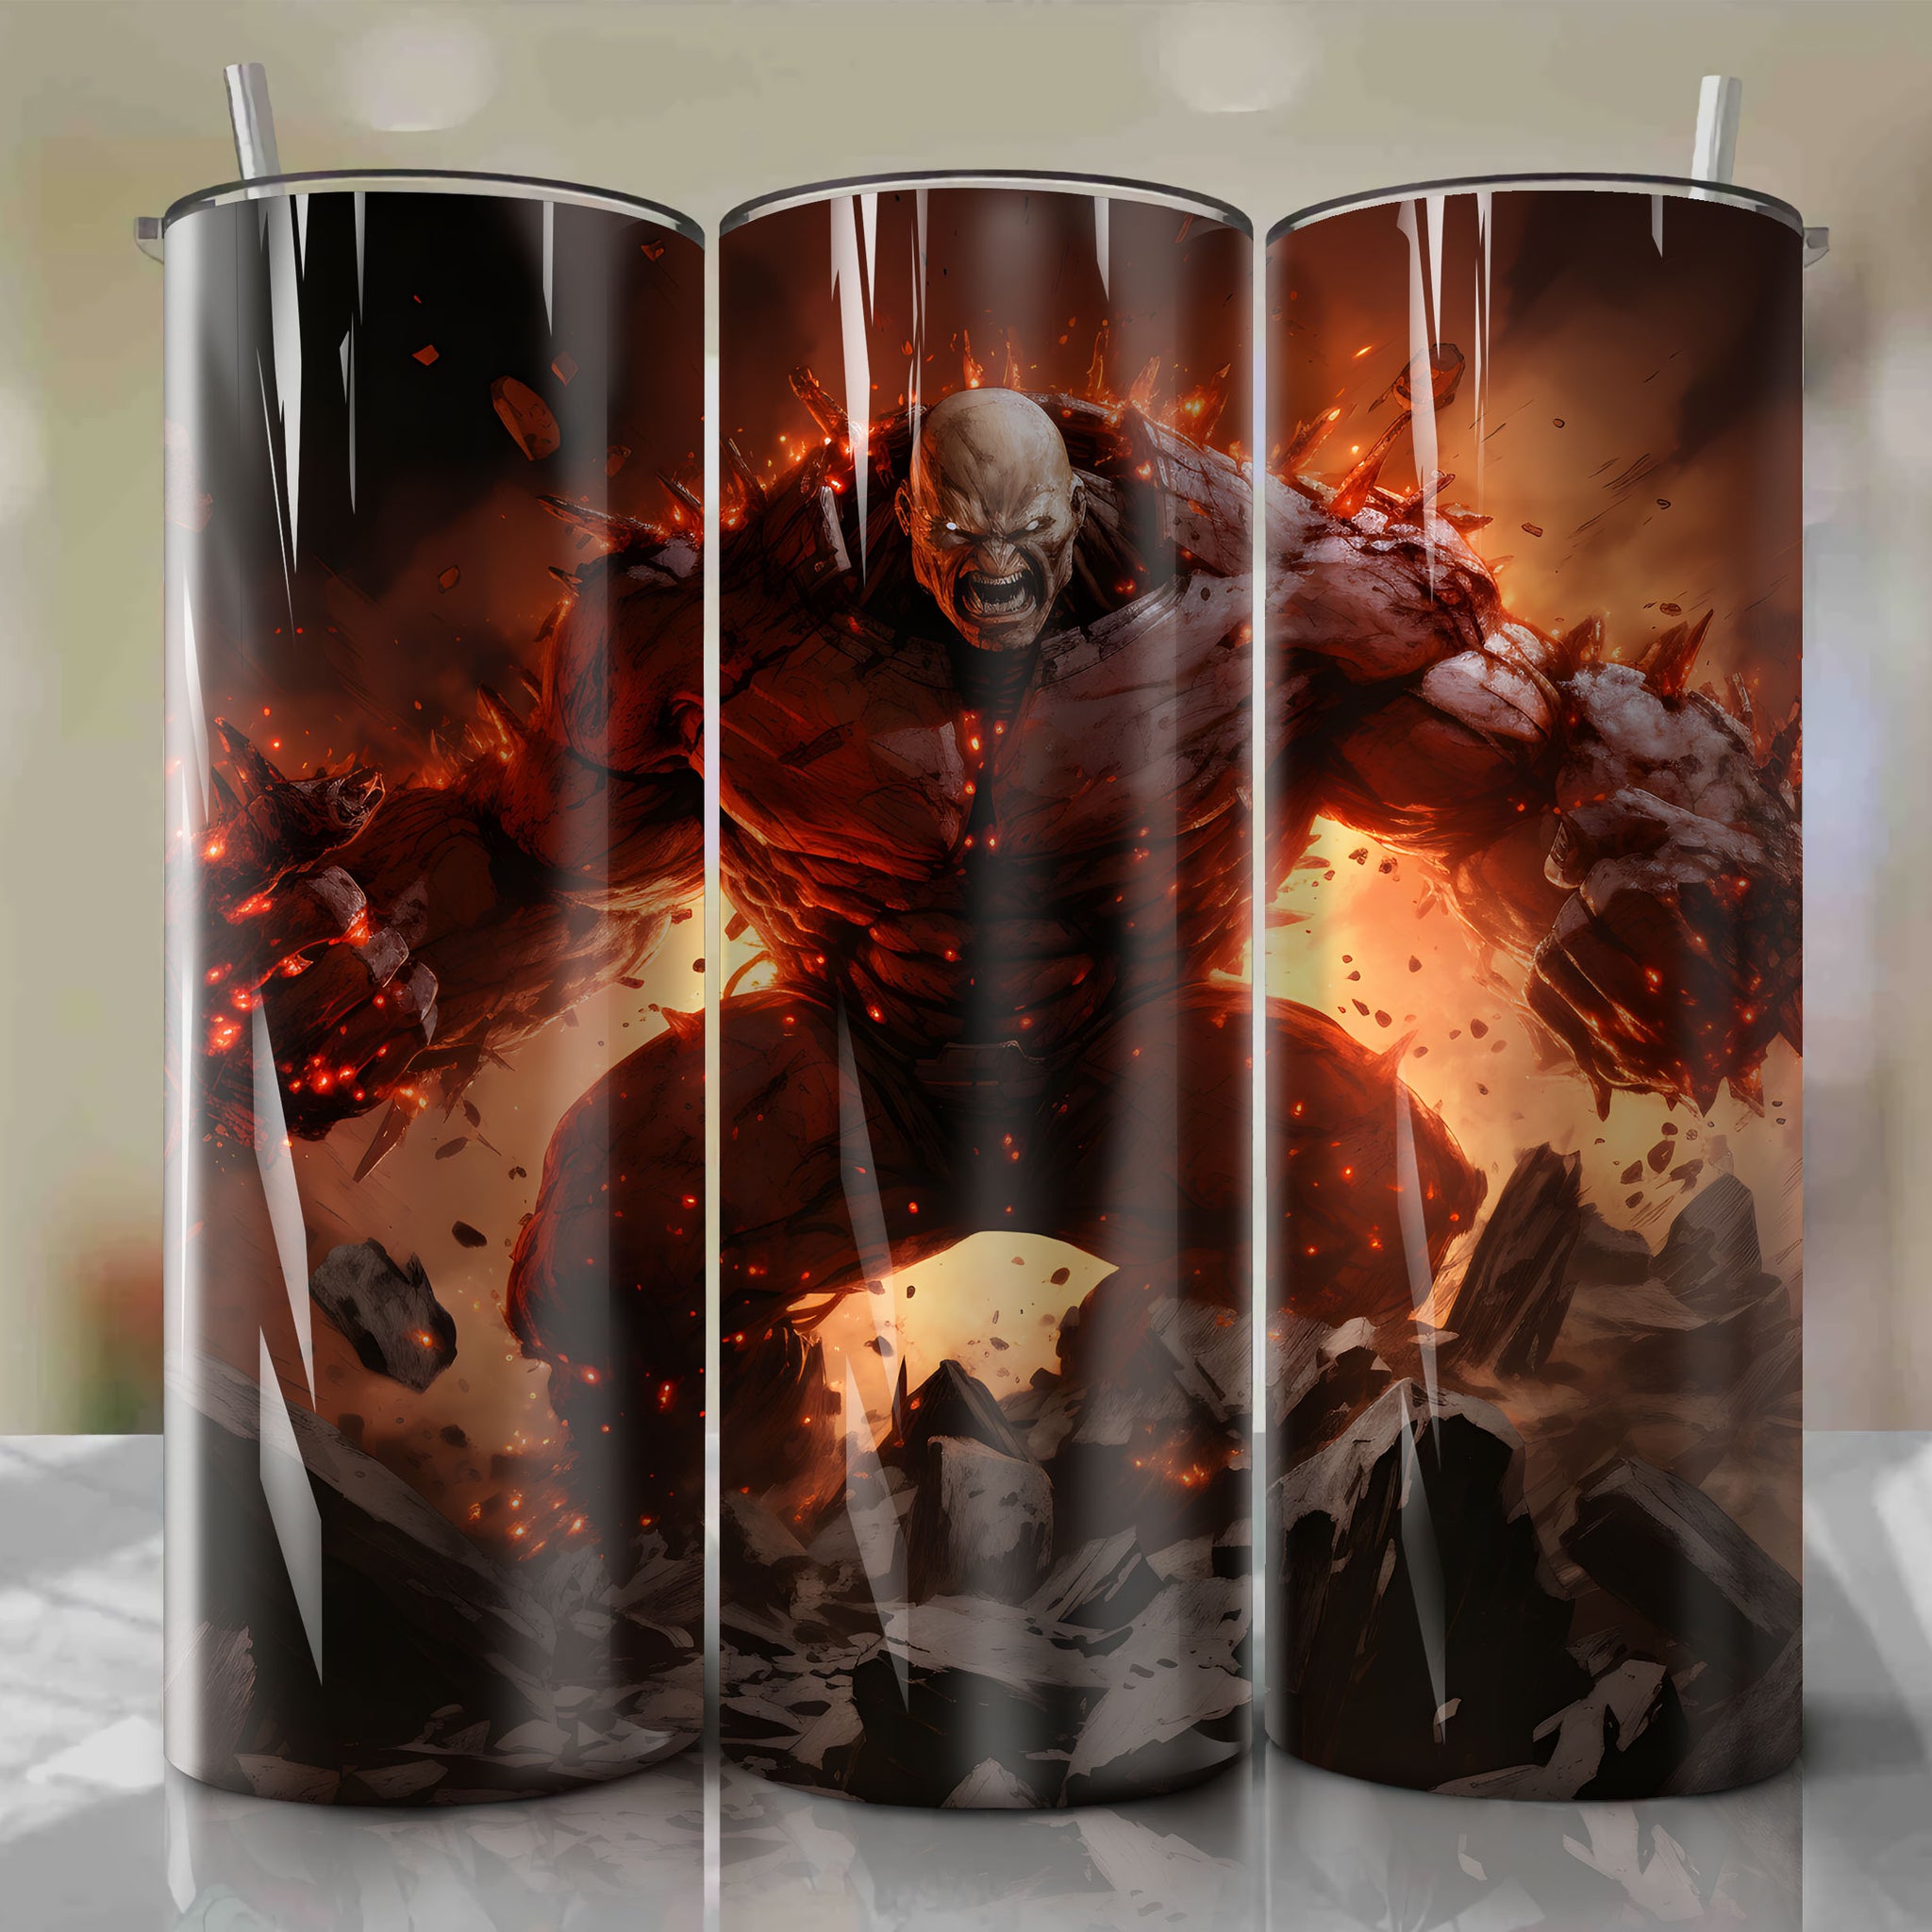 20 Oz Tumbler Wrap - Durable and Stylish Protection for Your Favorite Drinks
